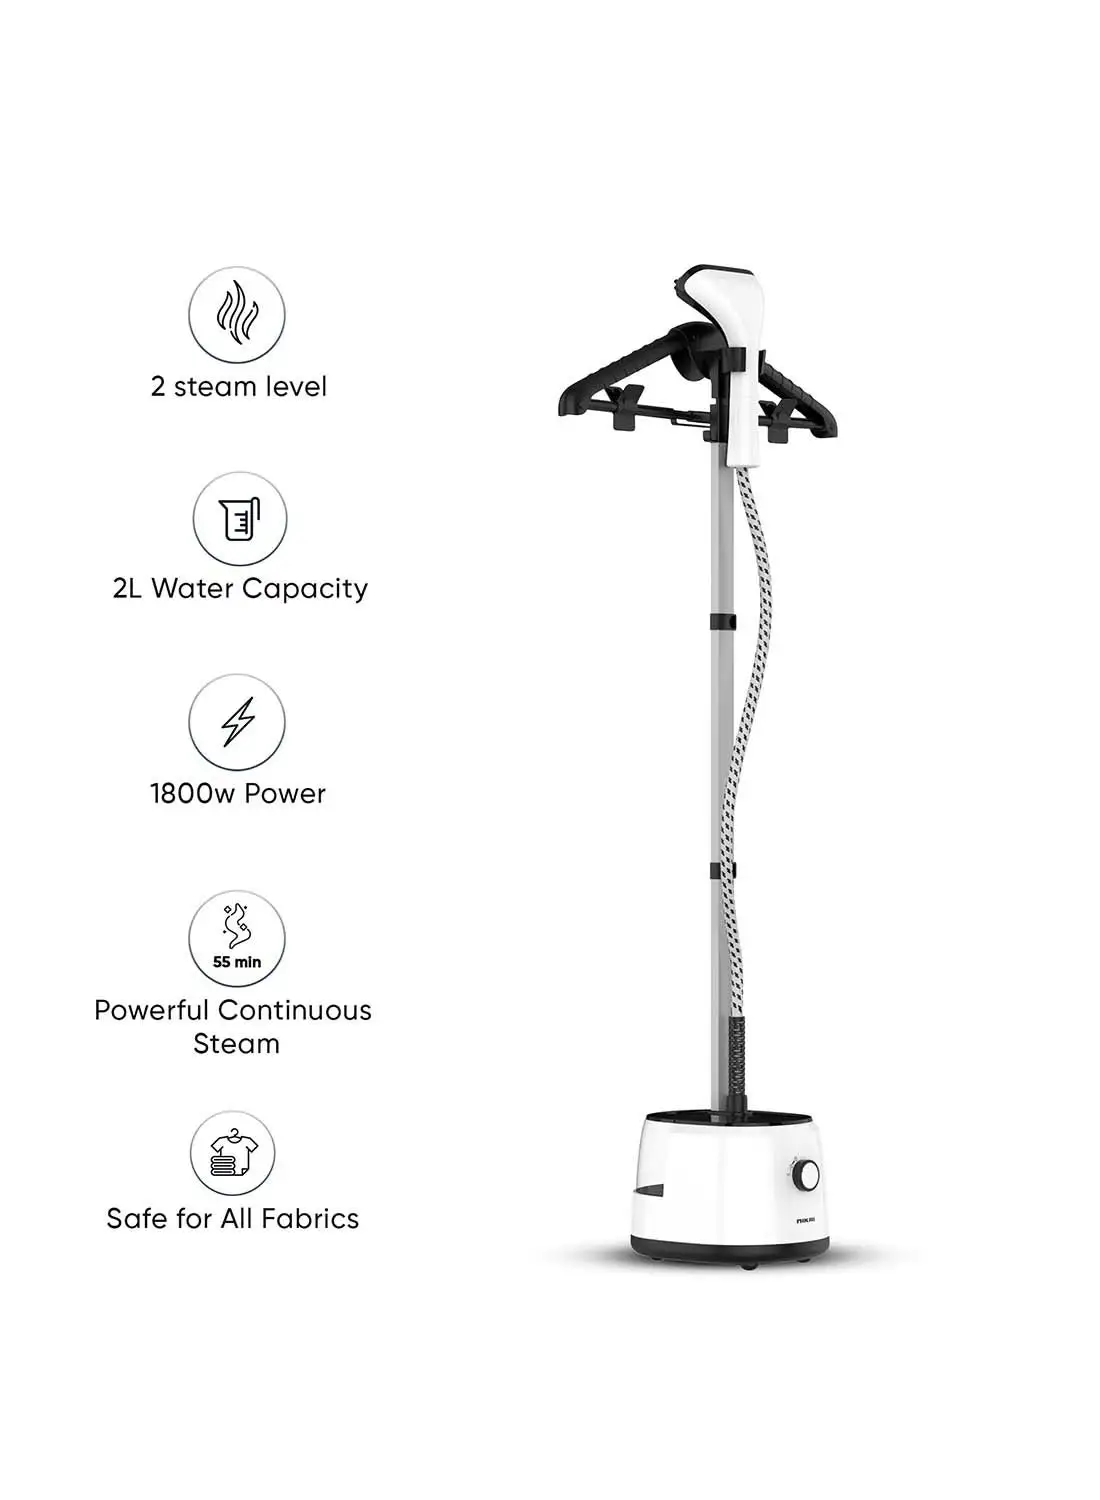 NIKAI Garment Steamer With Suit Hanger System, 2 Steam Levels, Overheating Protection, Wrinkle-Free, High-Quality Telescopic Poles, 50Min Steam, Ideal For Home And Business Use 2 L 1800 W NGS566AX White